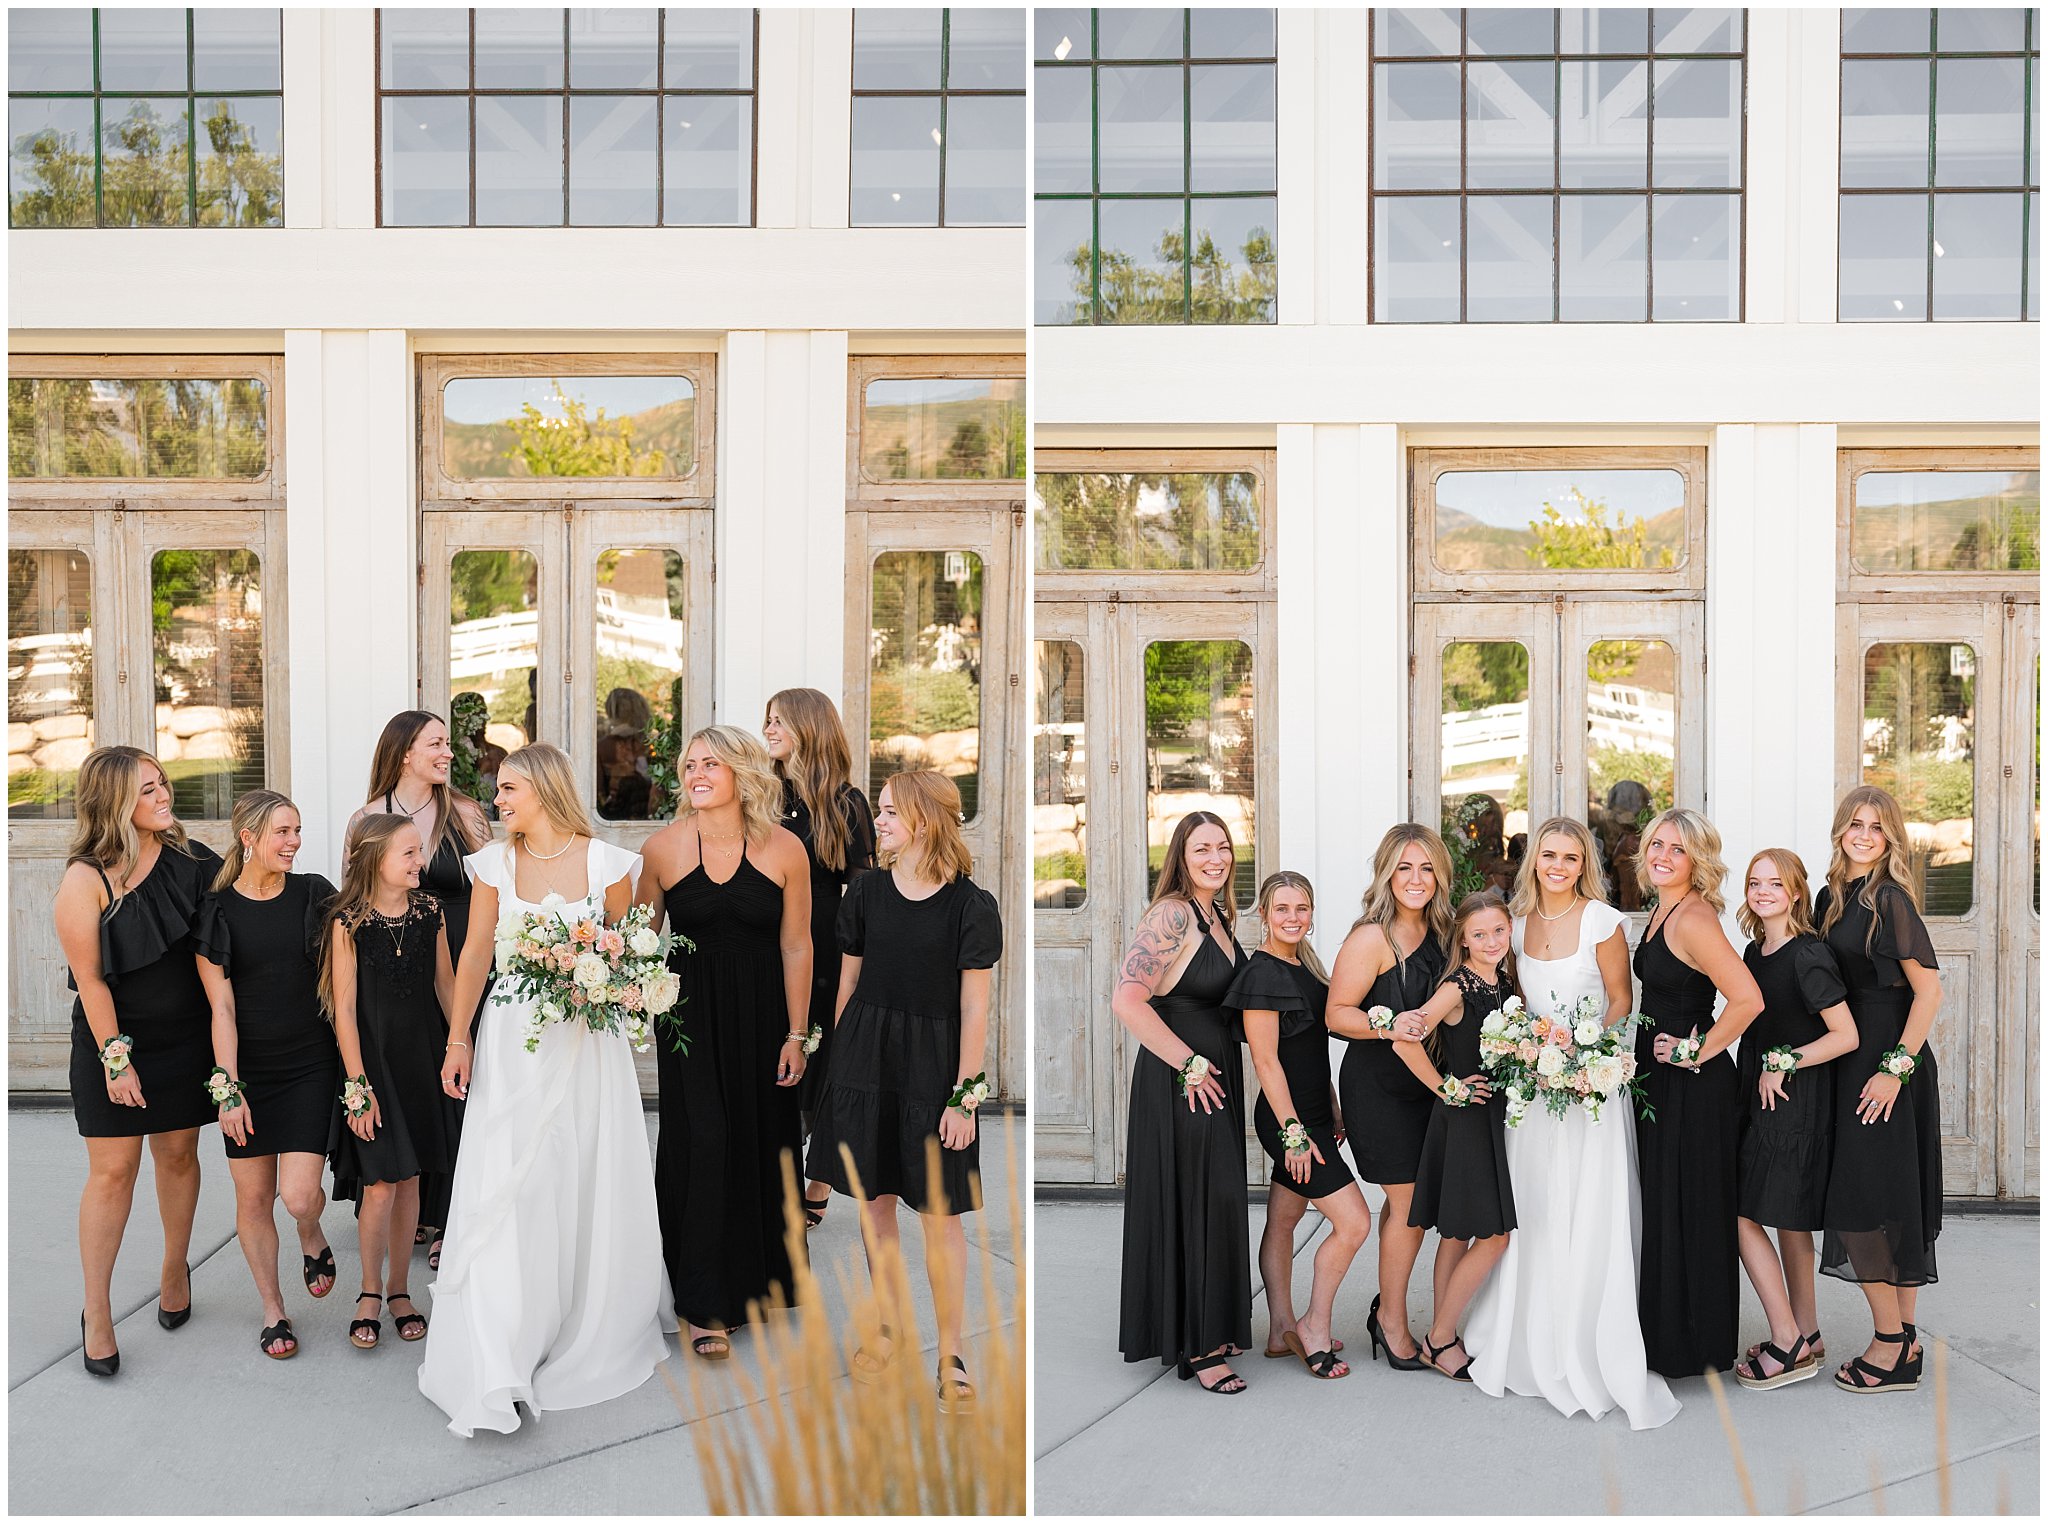 Wedding party portraits wearing black and white